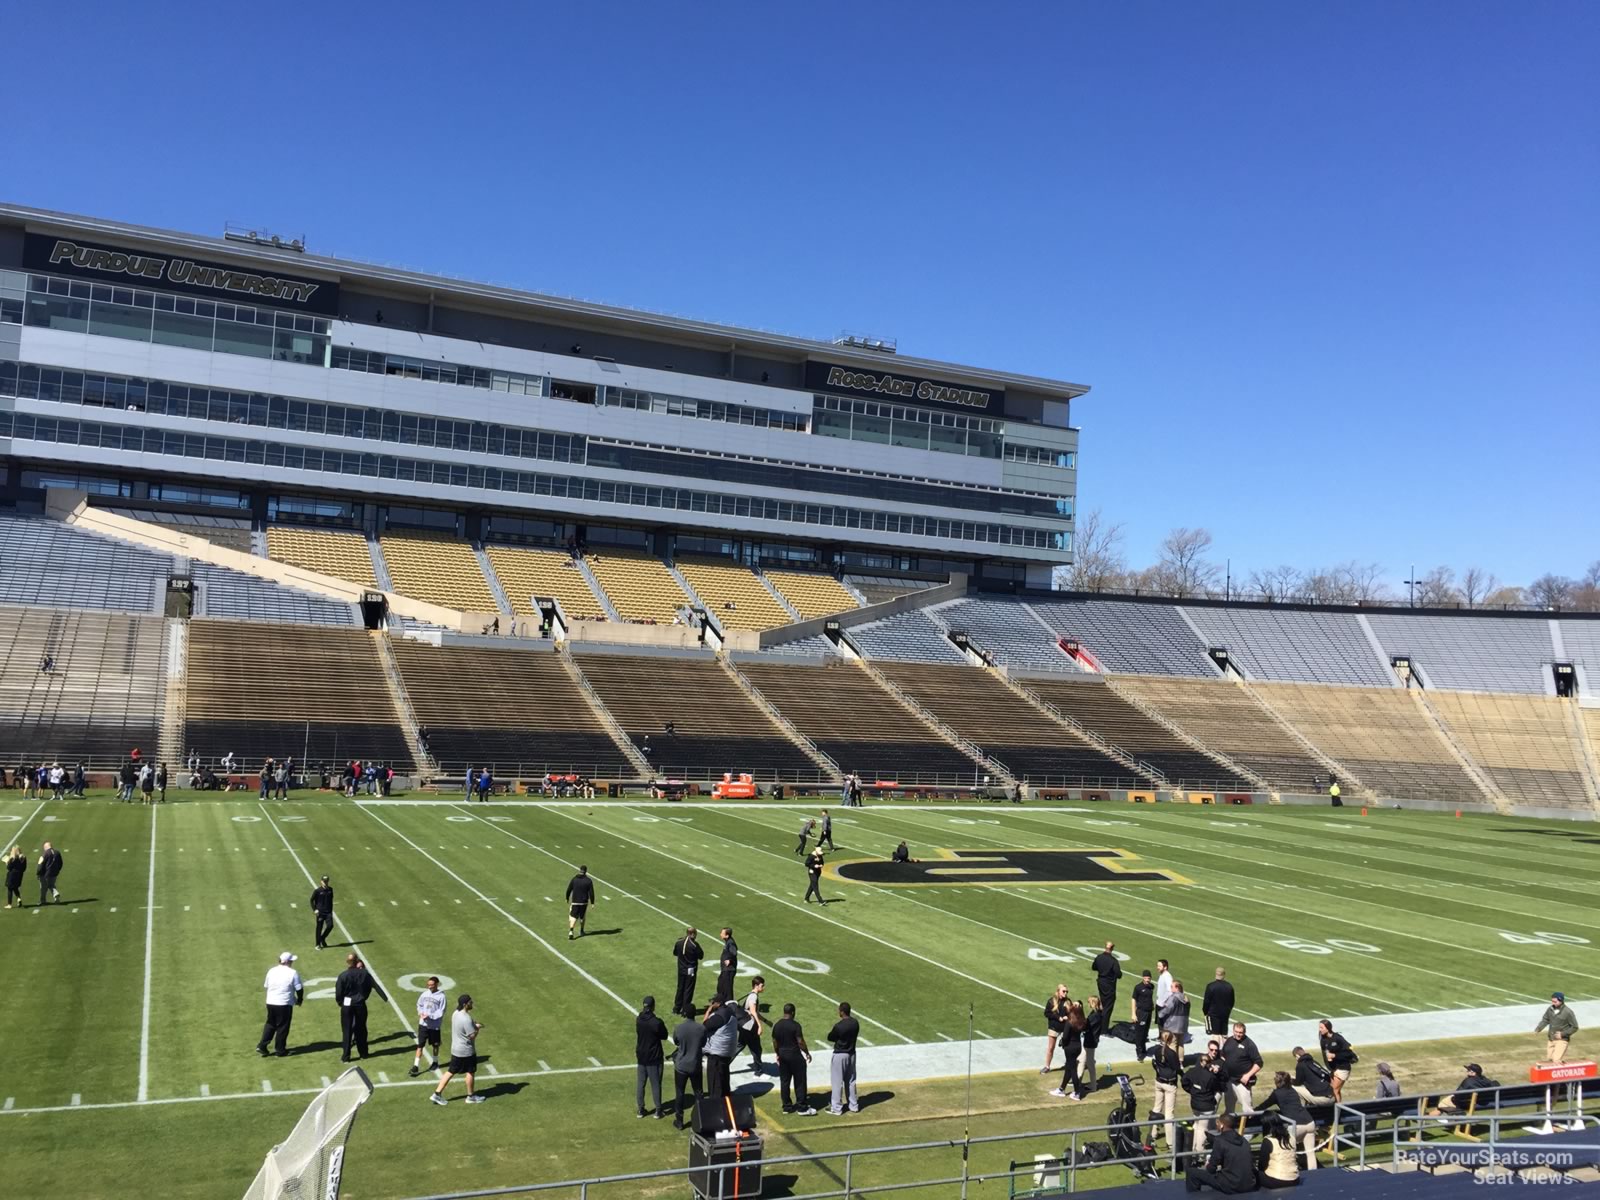 section 103, row 24 seat view  - ross-ade stadium